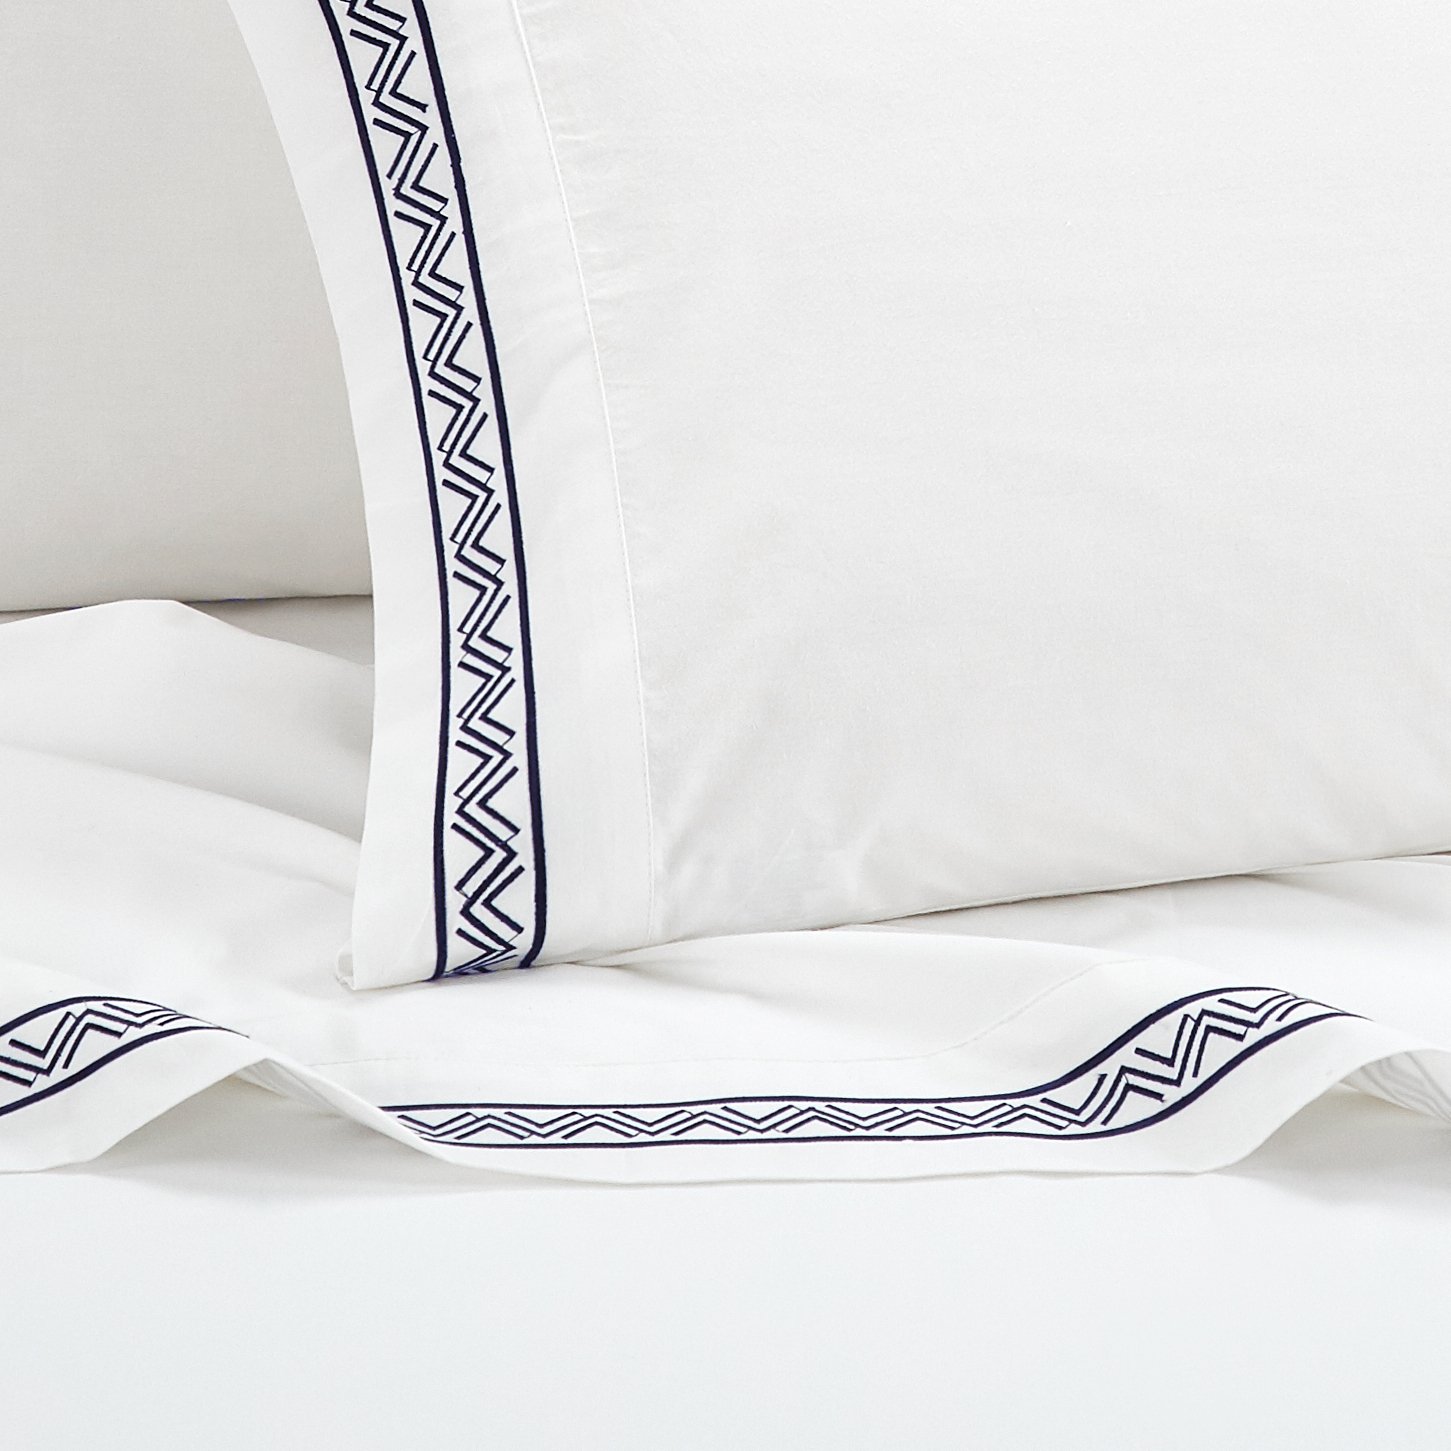 4 Piece Orden Organic Cotton Sheet Set Solid White With Dual Stripe Embroidery - Blue, Queen